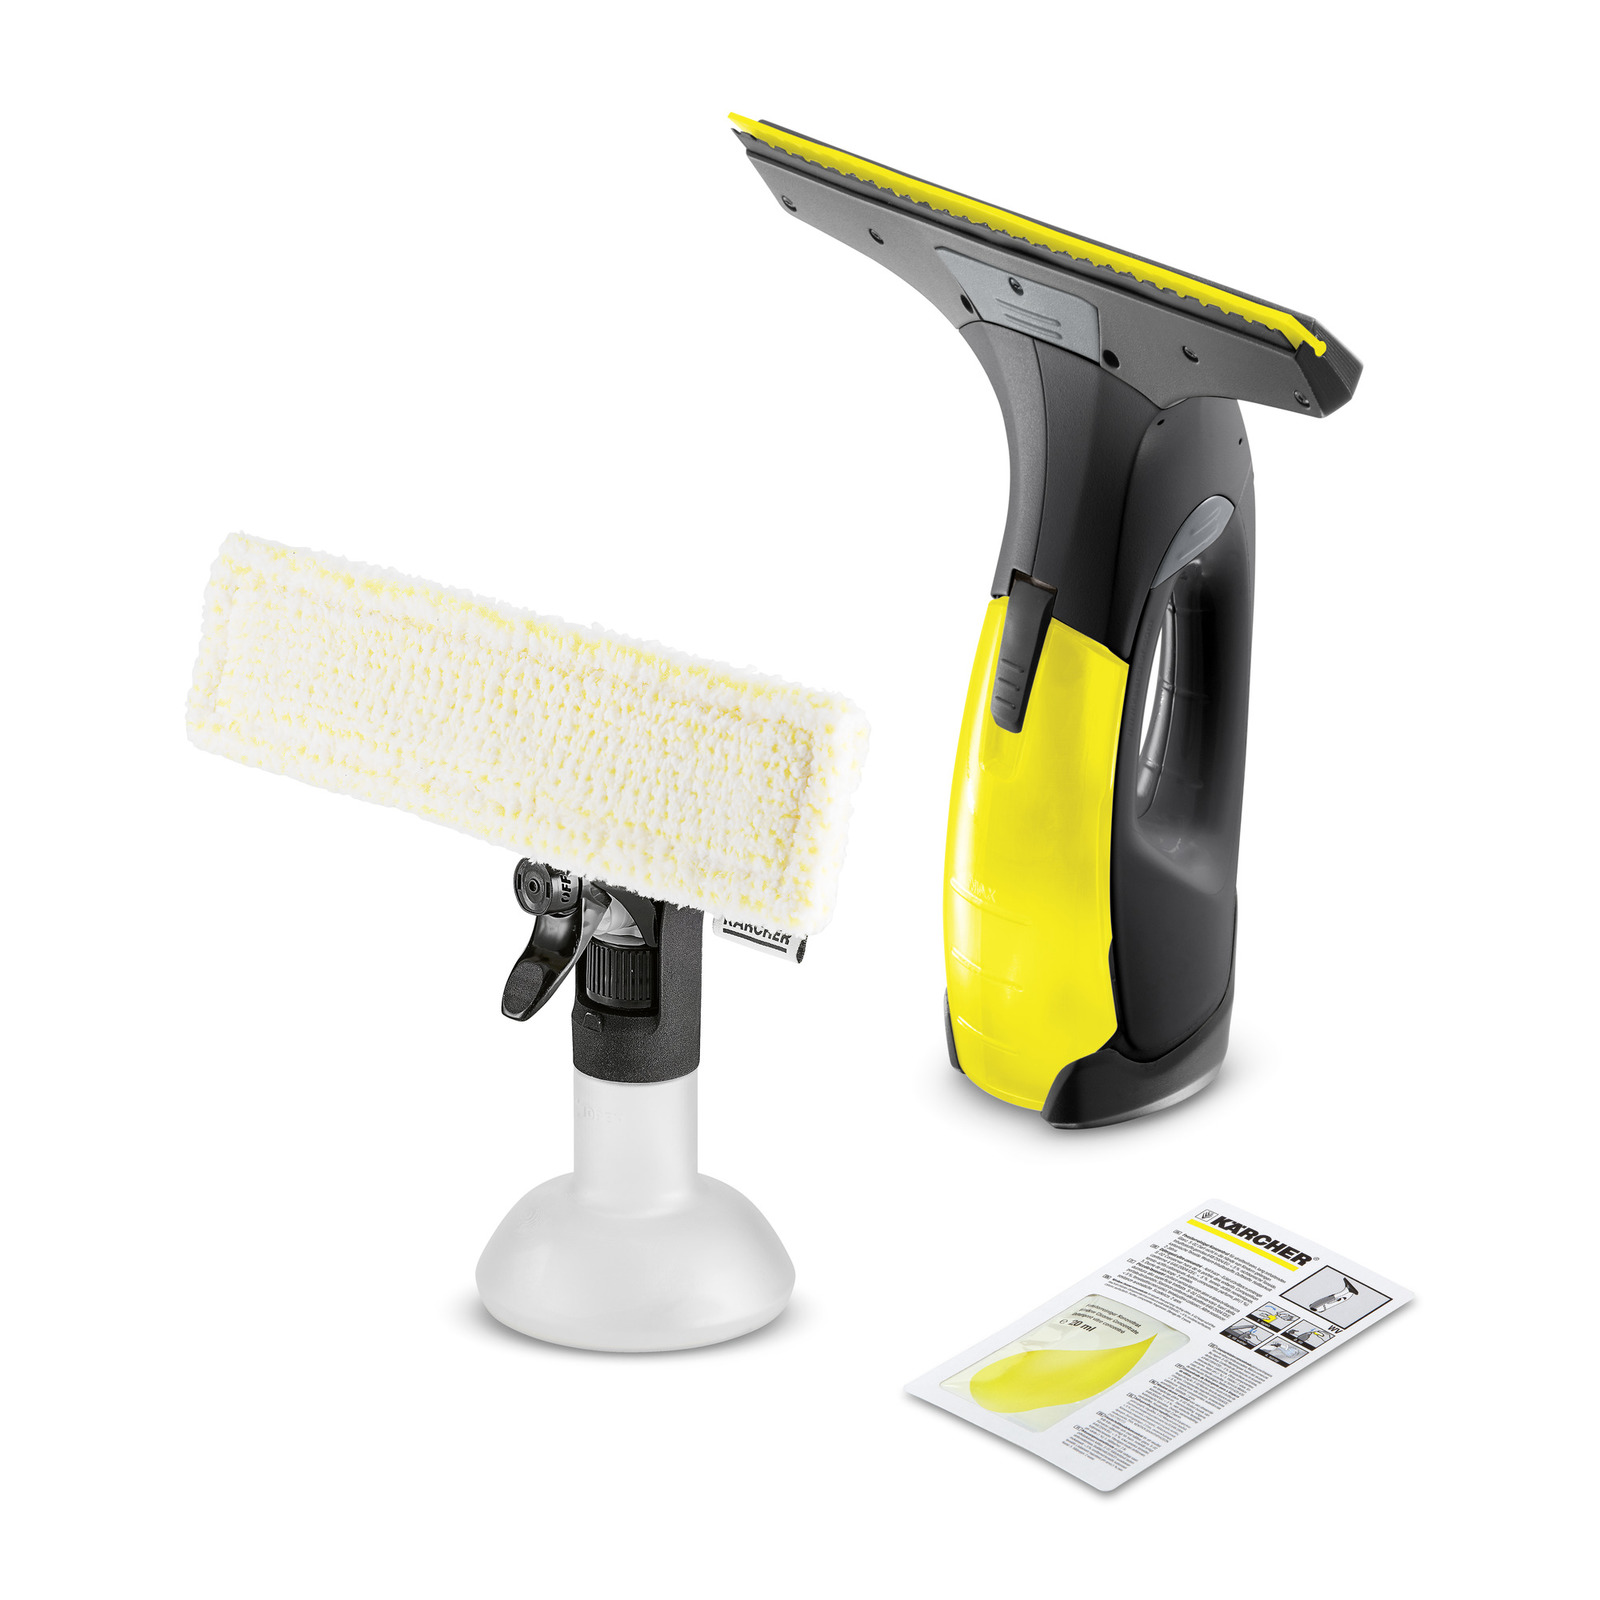 Karcher Window Vac Classic Comes with sprayer bottle cleans small spills also 